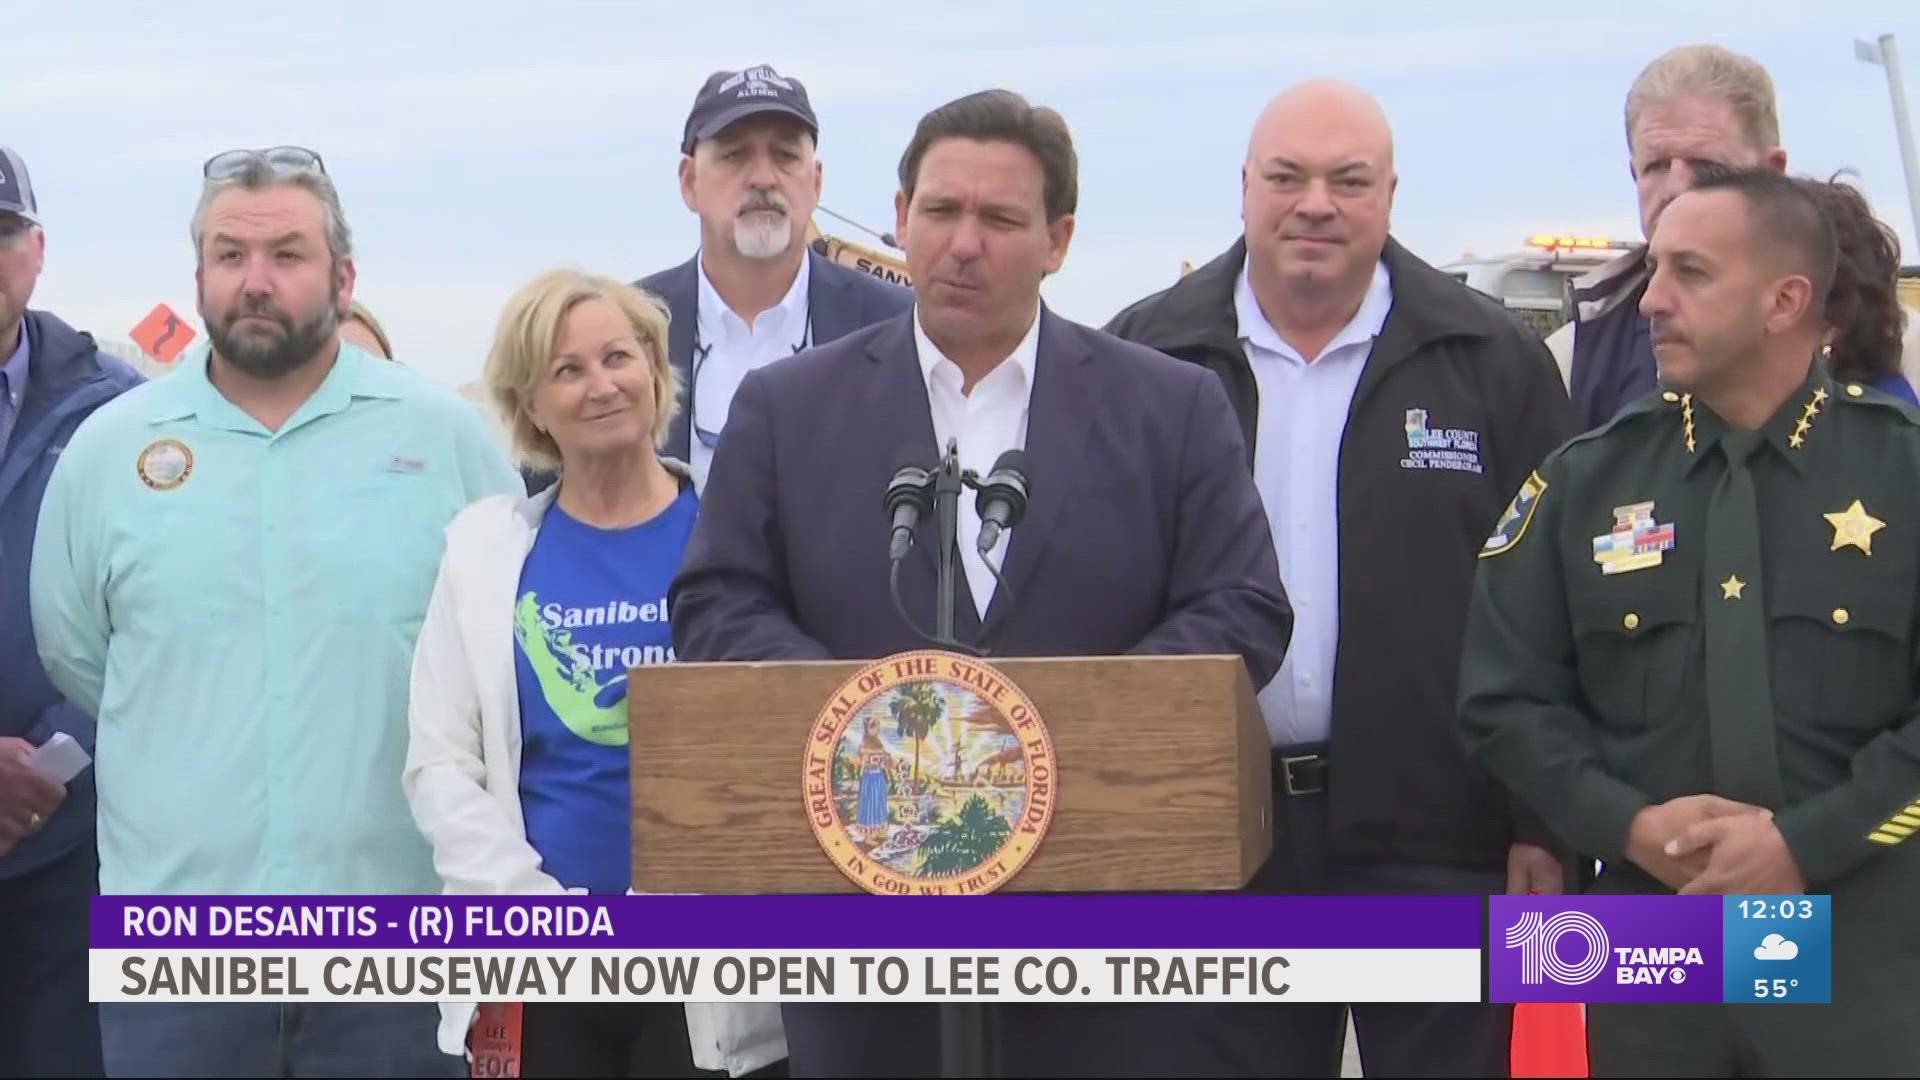 Gov. Ron DeSantis said the temporary restoration of the causeway was completed "way ahead of schedule."